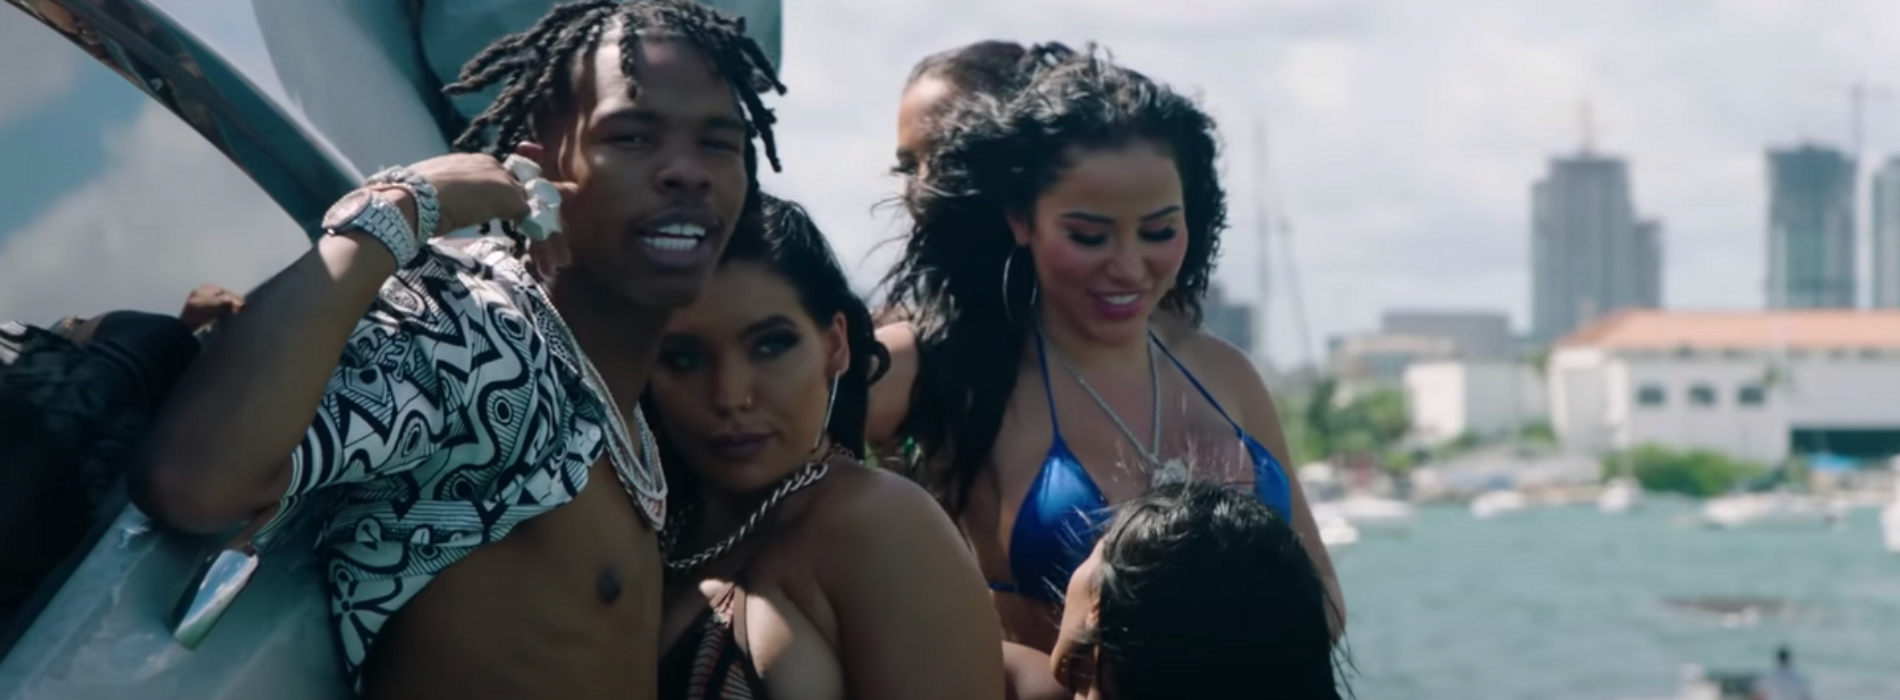 Lil Baby – Errbody /  On Me (Official Video) – Décembre 2020